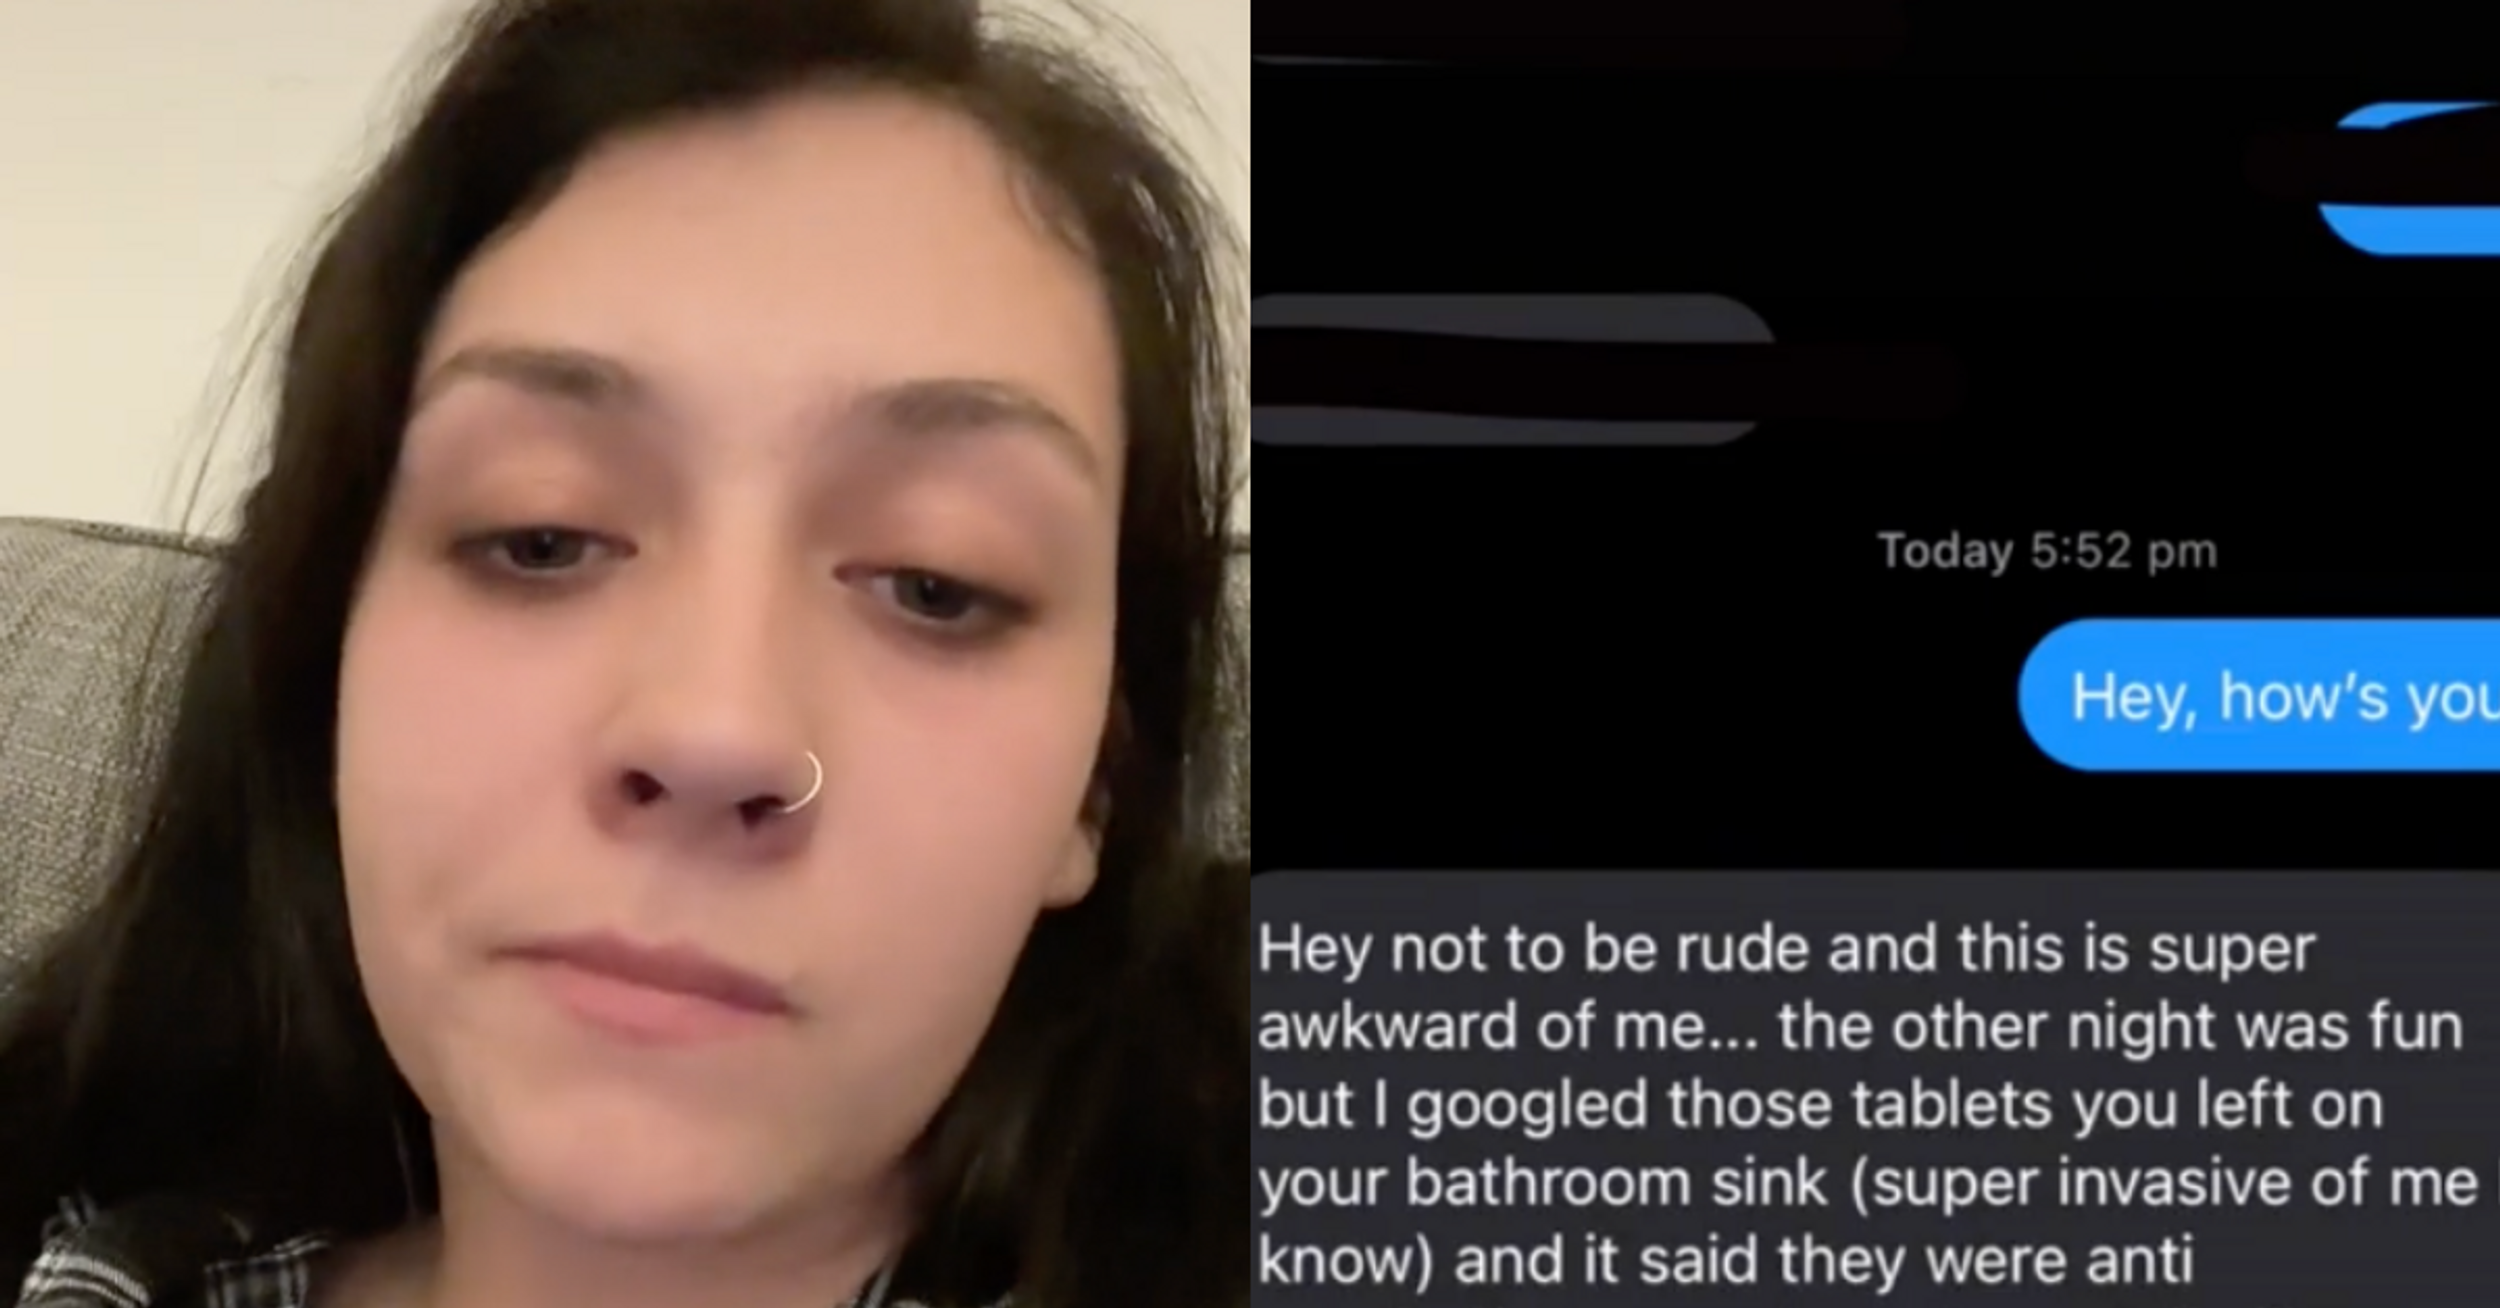 Woman Stunned After Date Calls Things Off After Googling What The Meds In Her Bathroom Are For